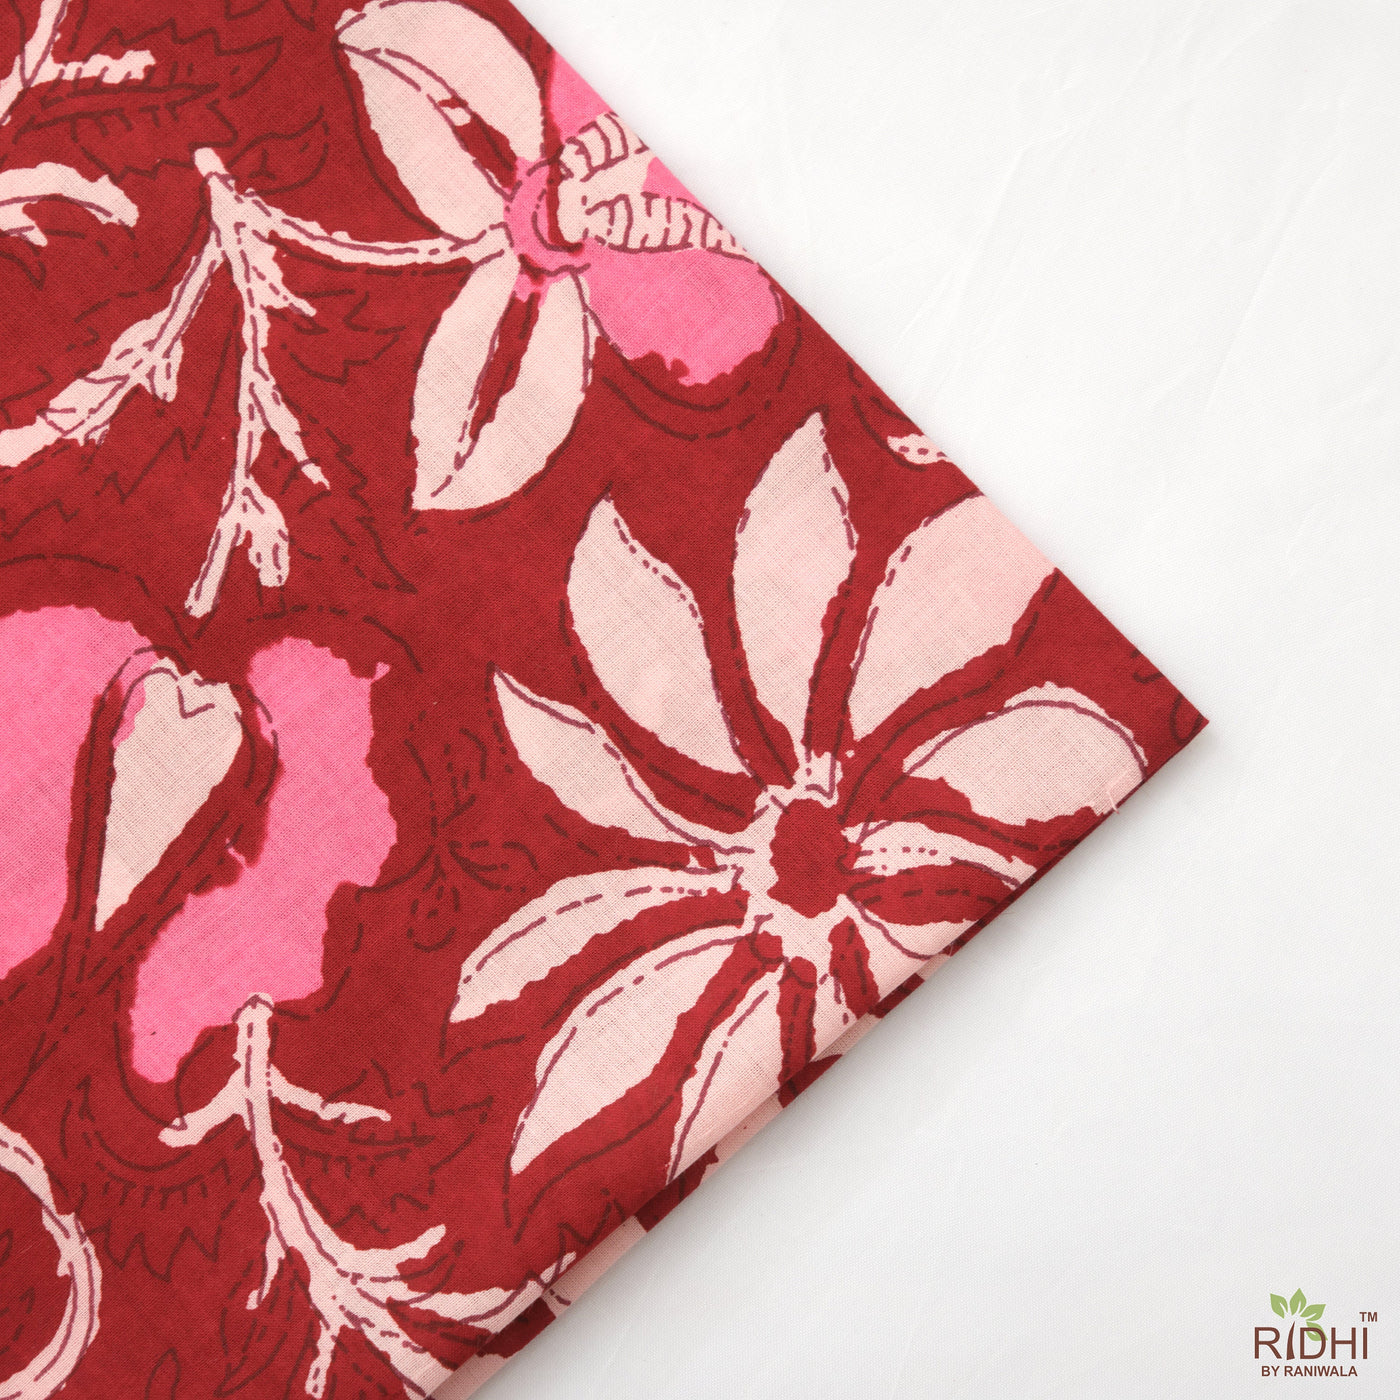 Fabricrush Mahogany, Thulian and Watermelon Pink Floral Indian Printed 100% Pure Cotton Cloth Napkins, 18x18"- Cocktail Napkins, 20x20"- Dinner Napkins